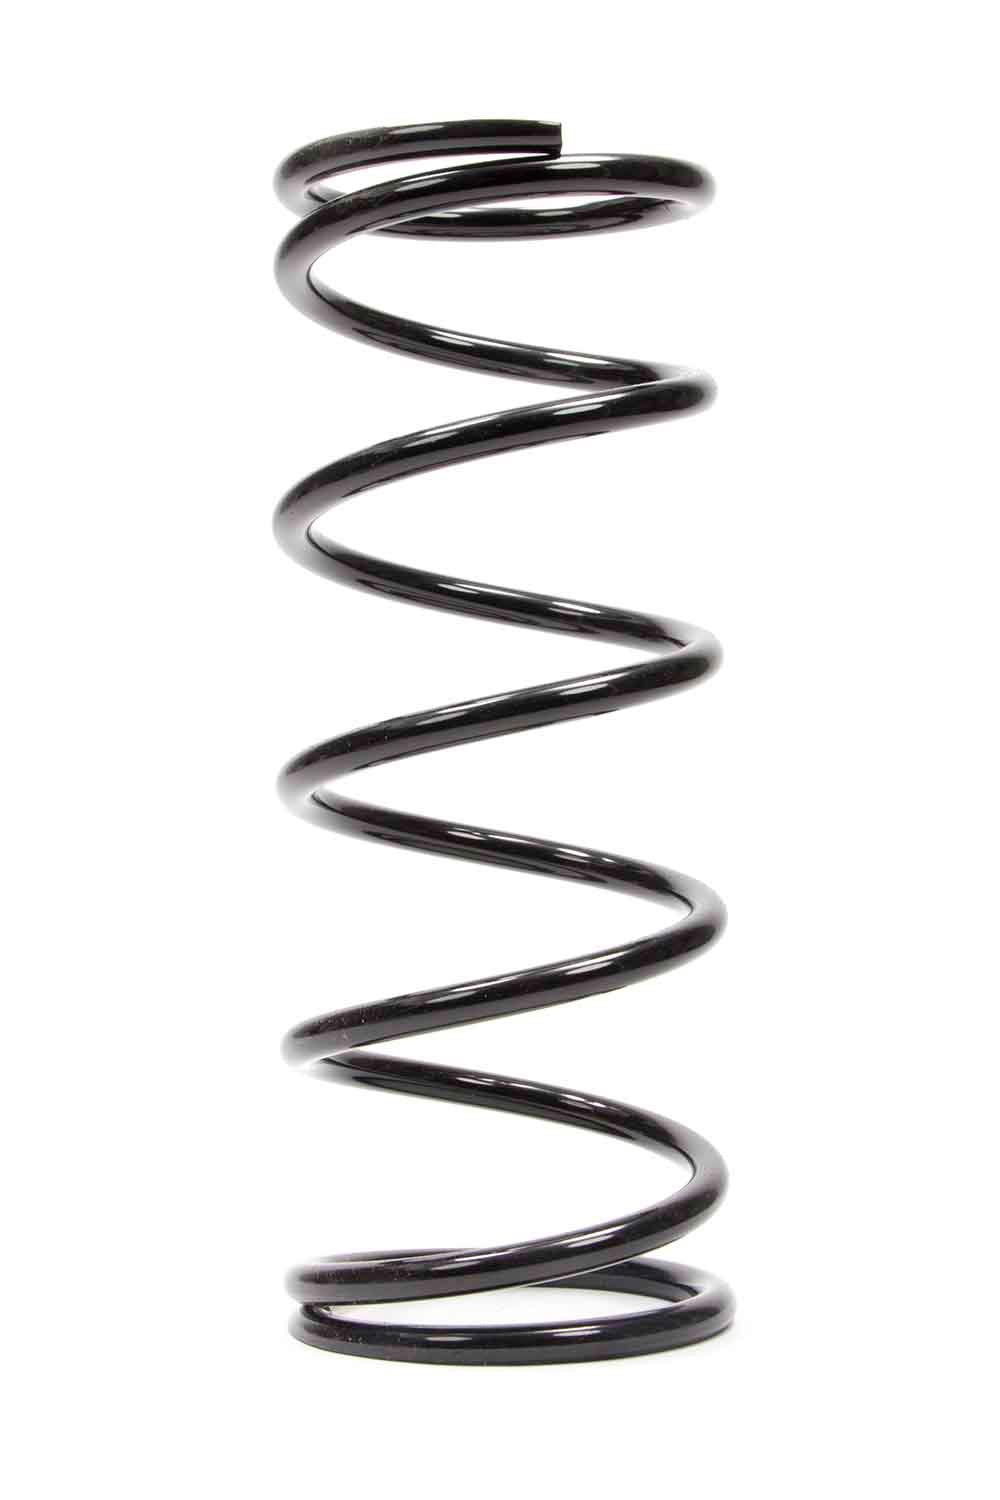 Conv Rear Spring 5in x 13in x 150 - Burlile Performance Products